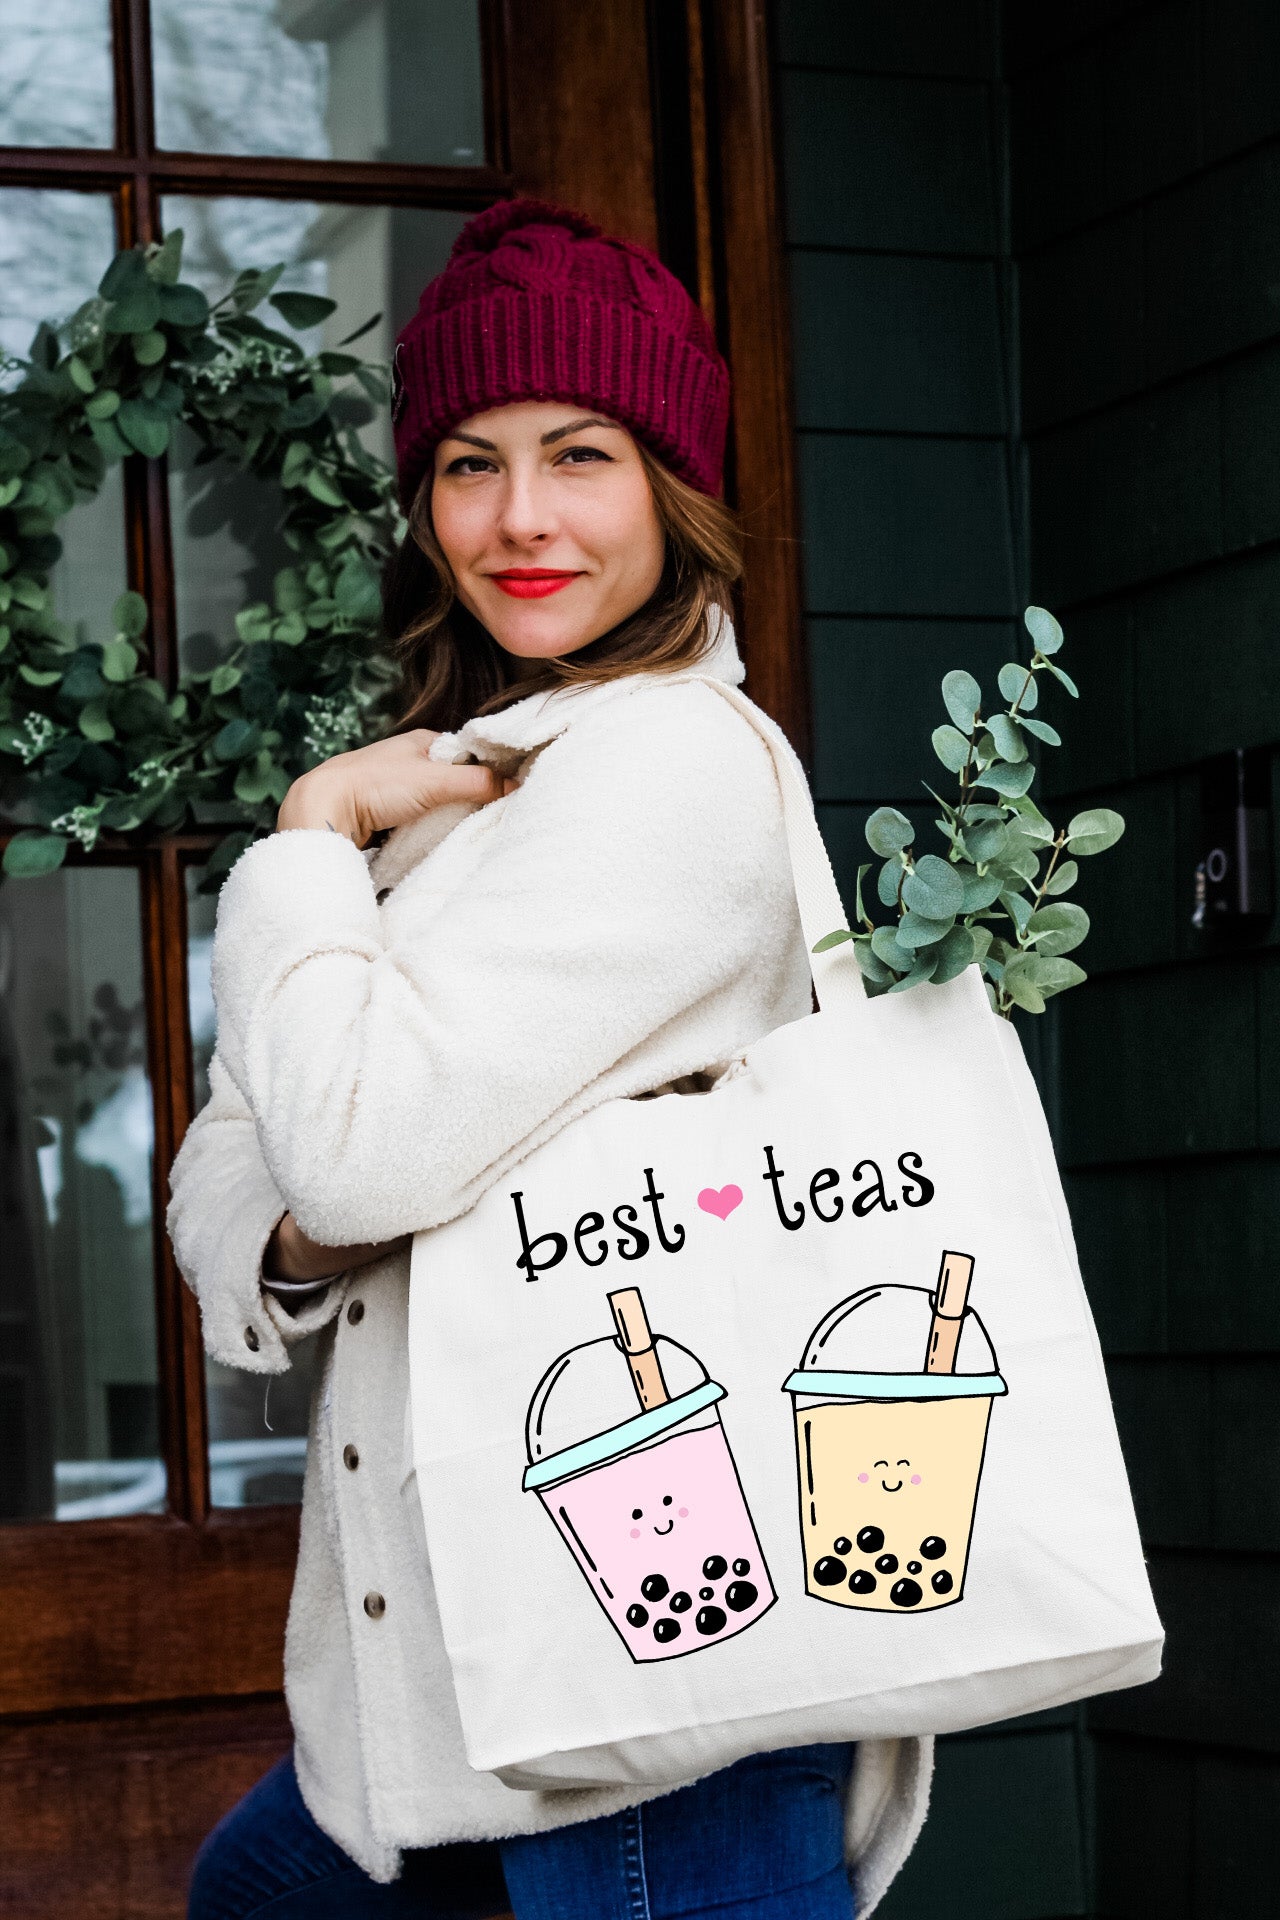 a woman carrying a bag that says best teas